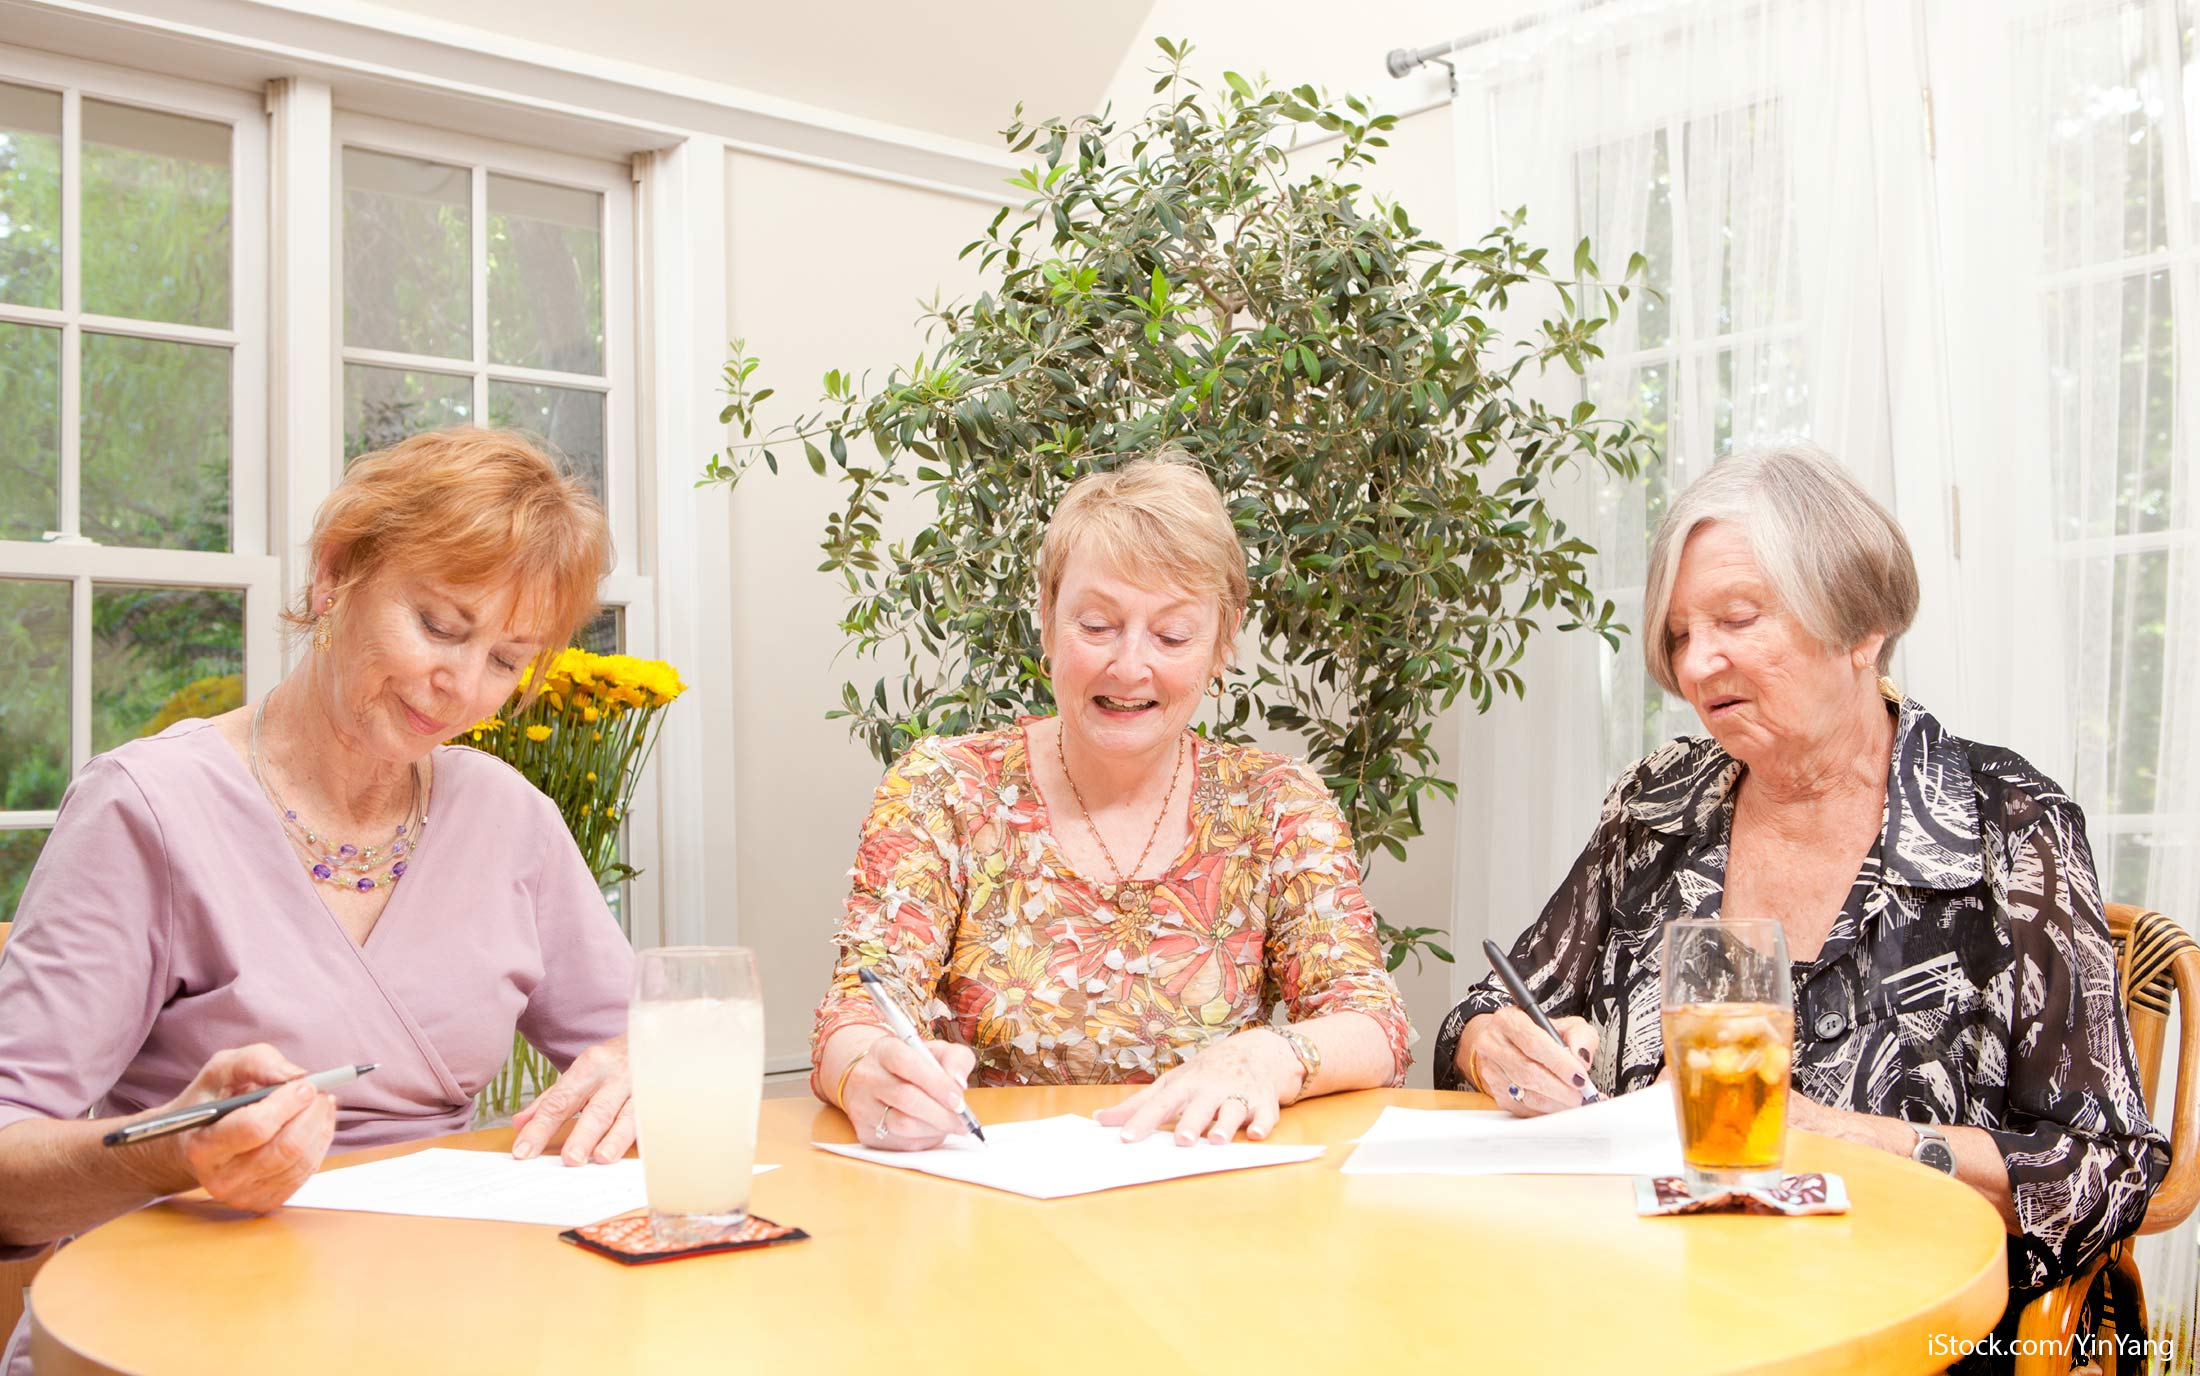 What are some special tax deductions for seniors?